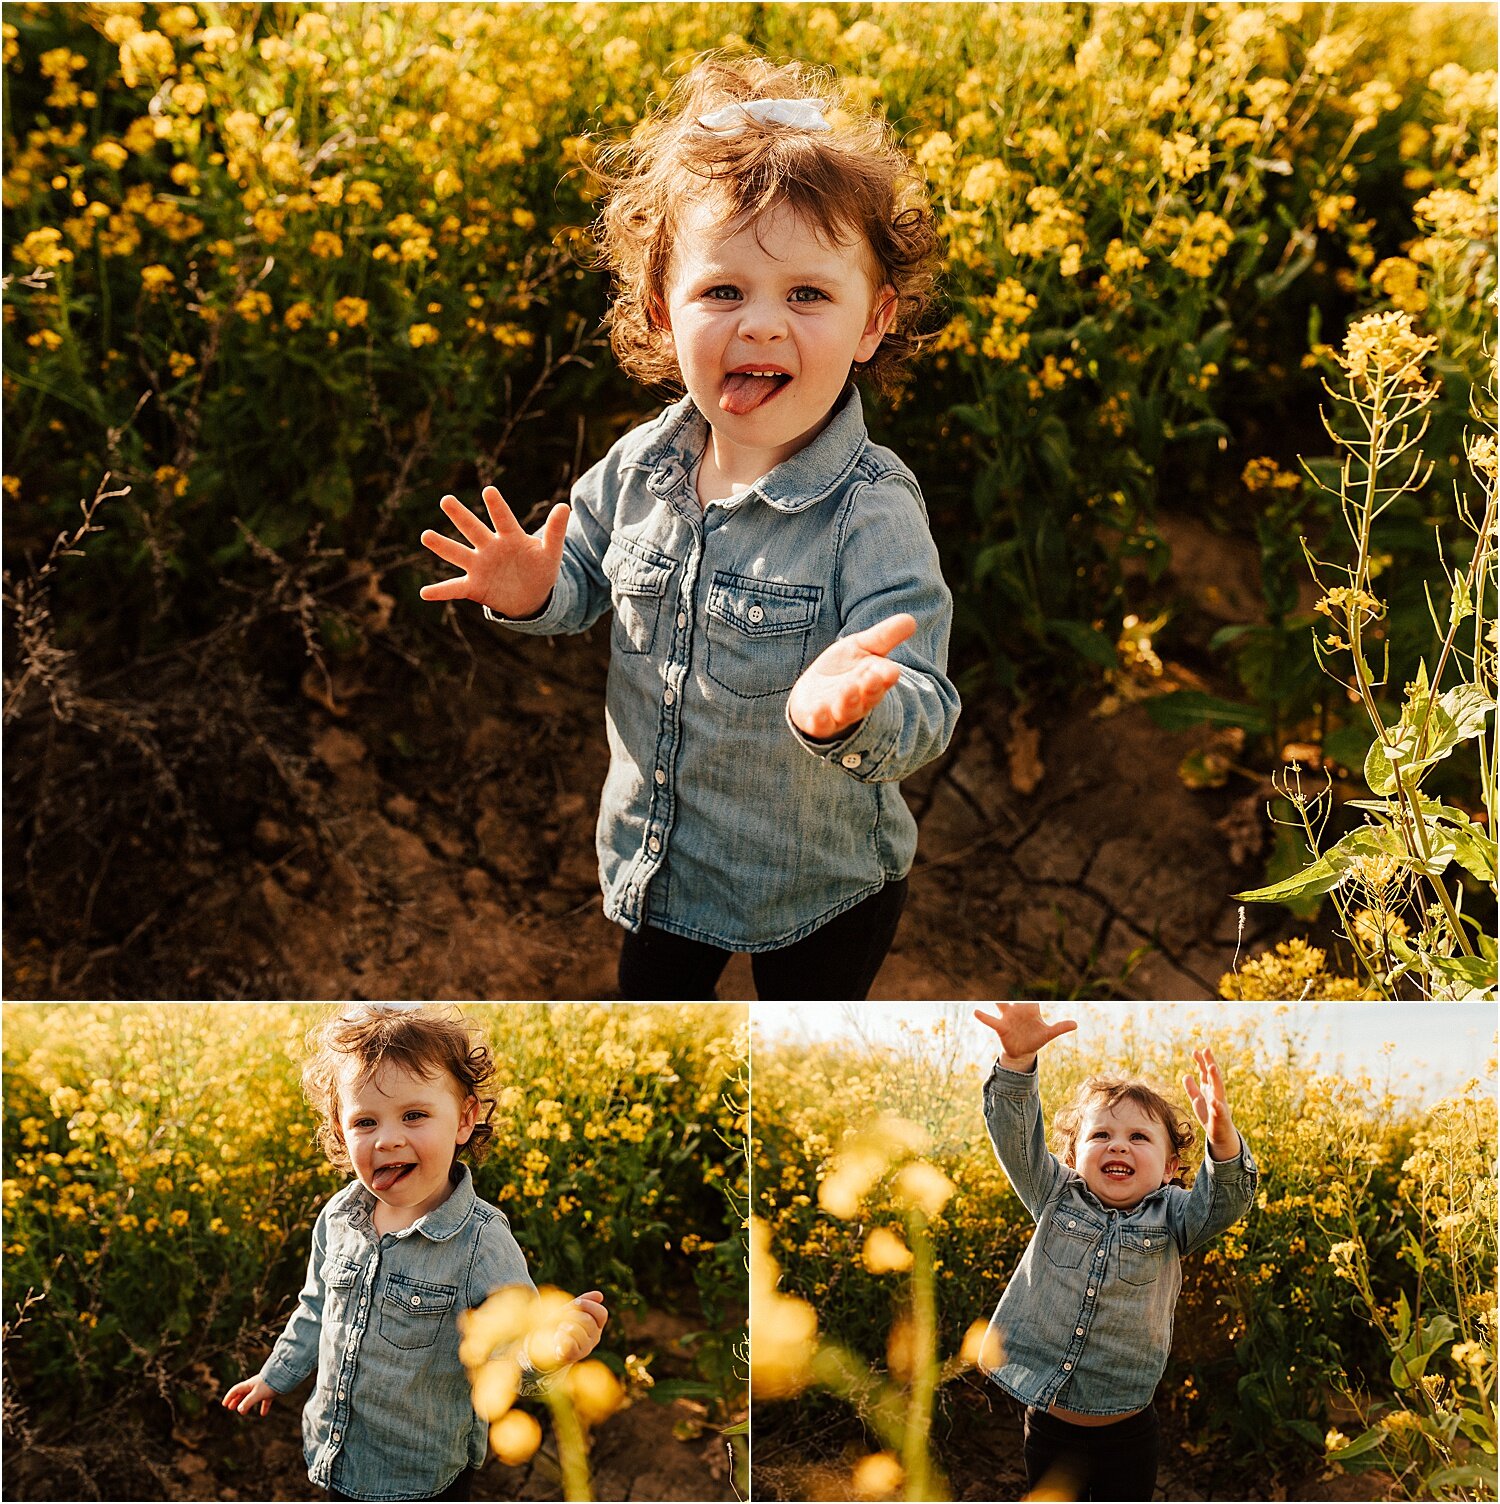 spring field of yellow flowers family session5.jpg